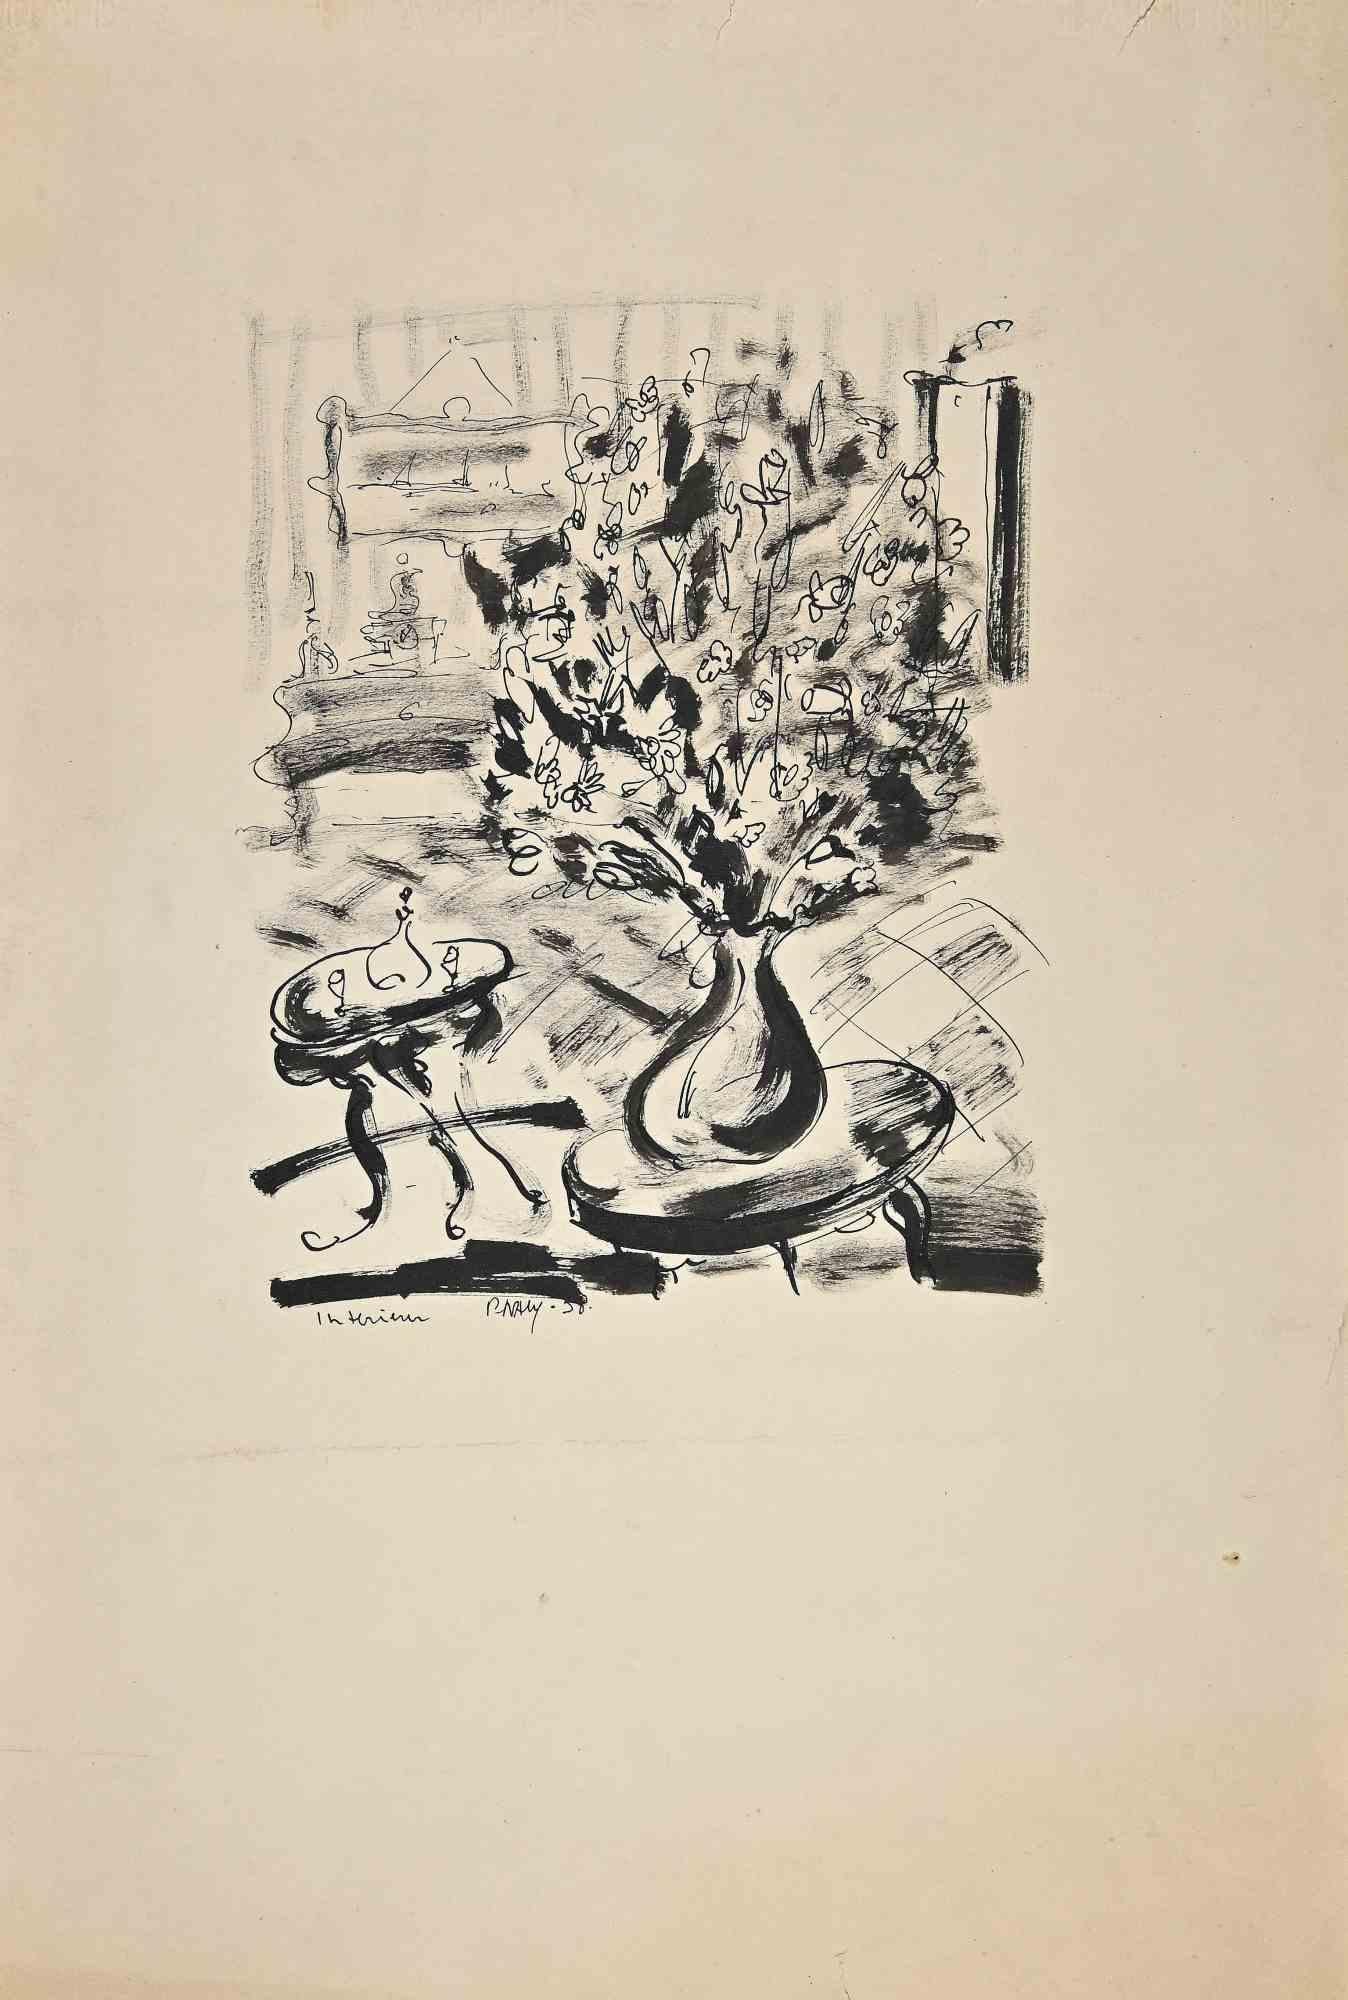 Flowers is an original Contemporary artwork realized in the half of the 20th Century by Robert Naly (1900 - 1983). 

Original ink drawing. 

Hand-signed.

Good conditions except for consumed margins with some scratches.